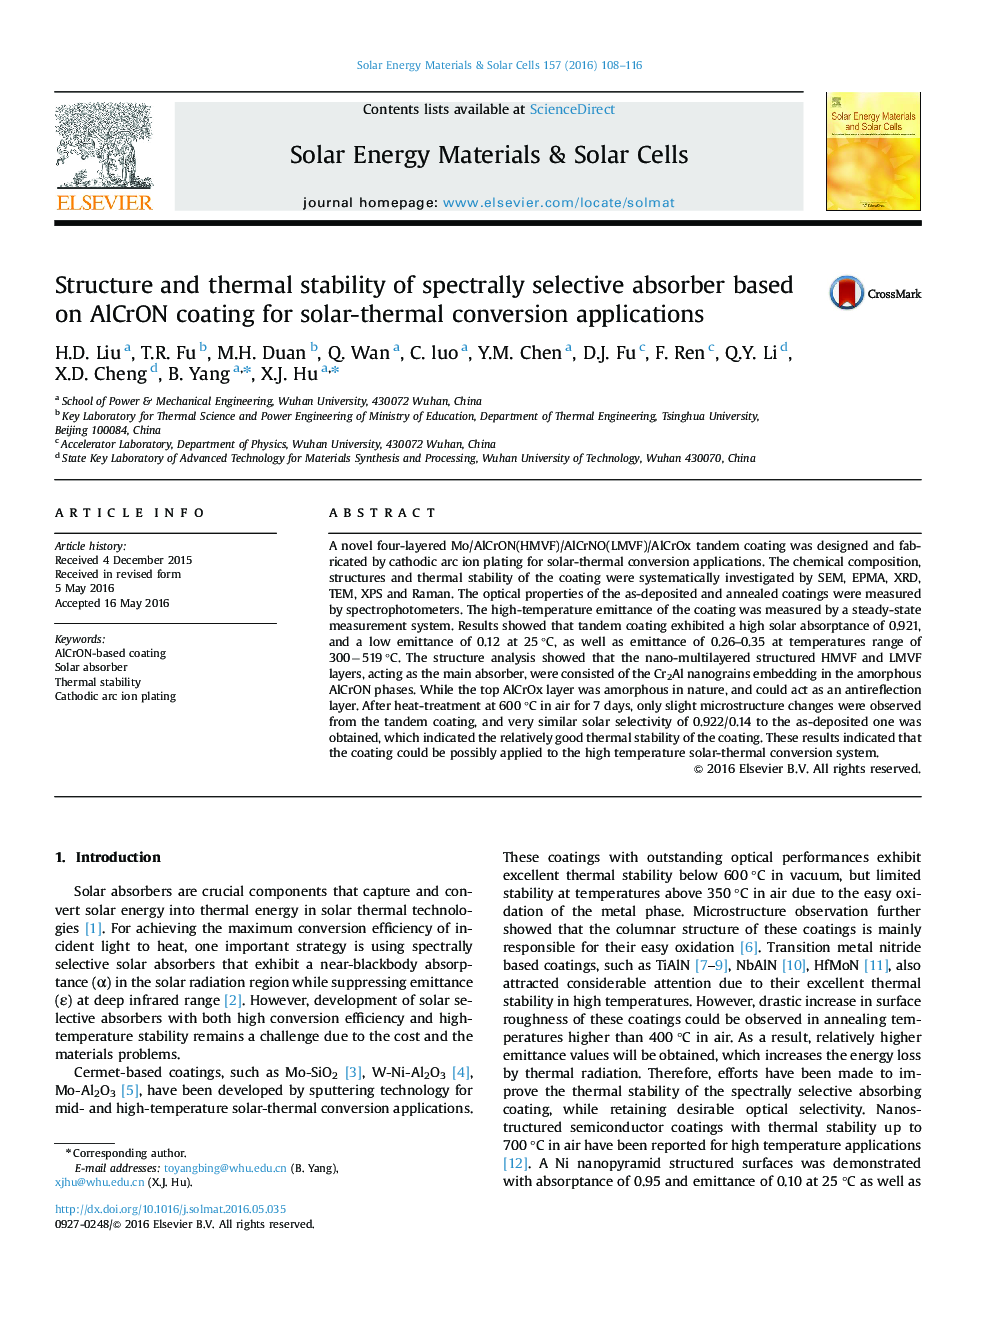 Structure and thermal stability of spectrally selective absorber based on AlCrON coating for solar-thermal conversion applications